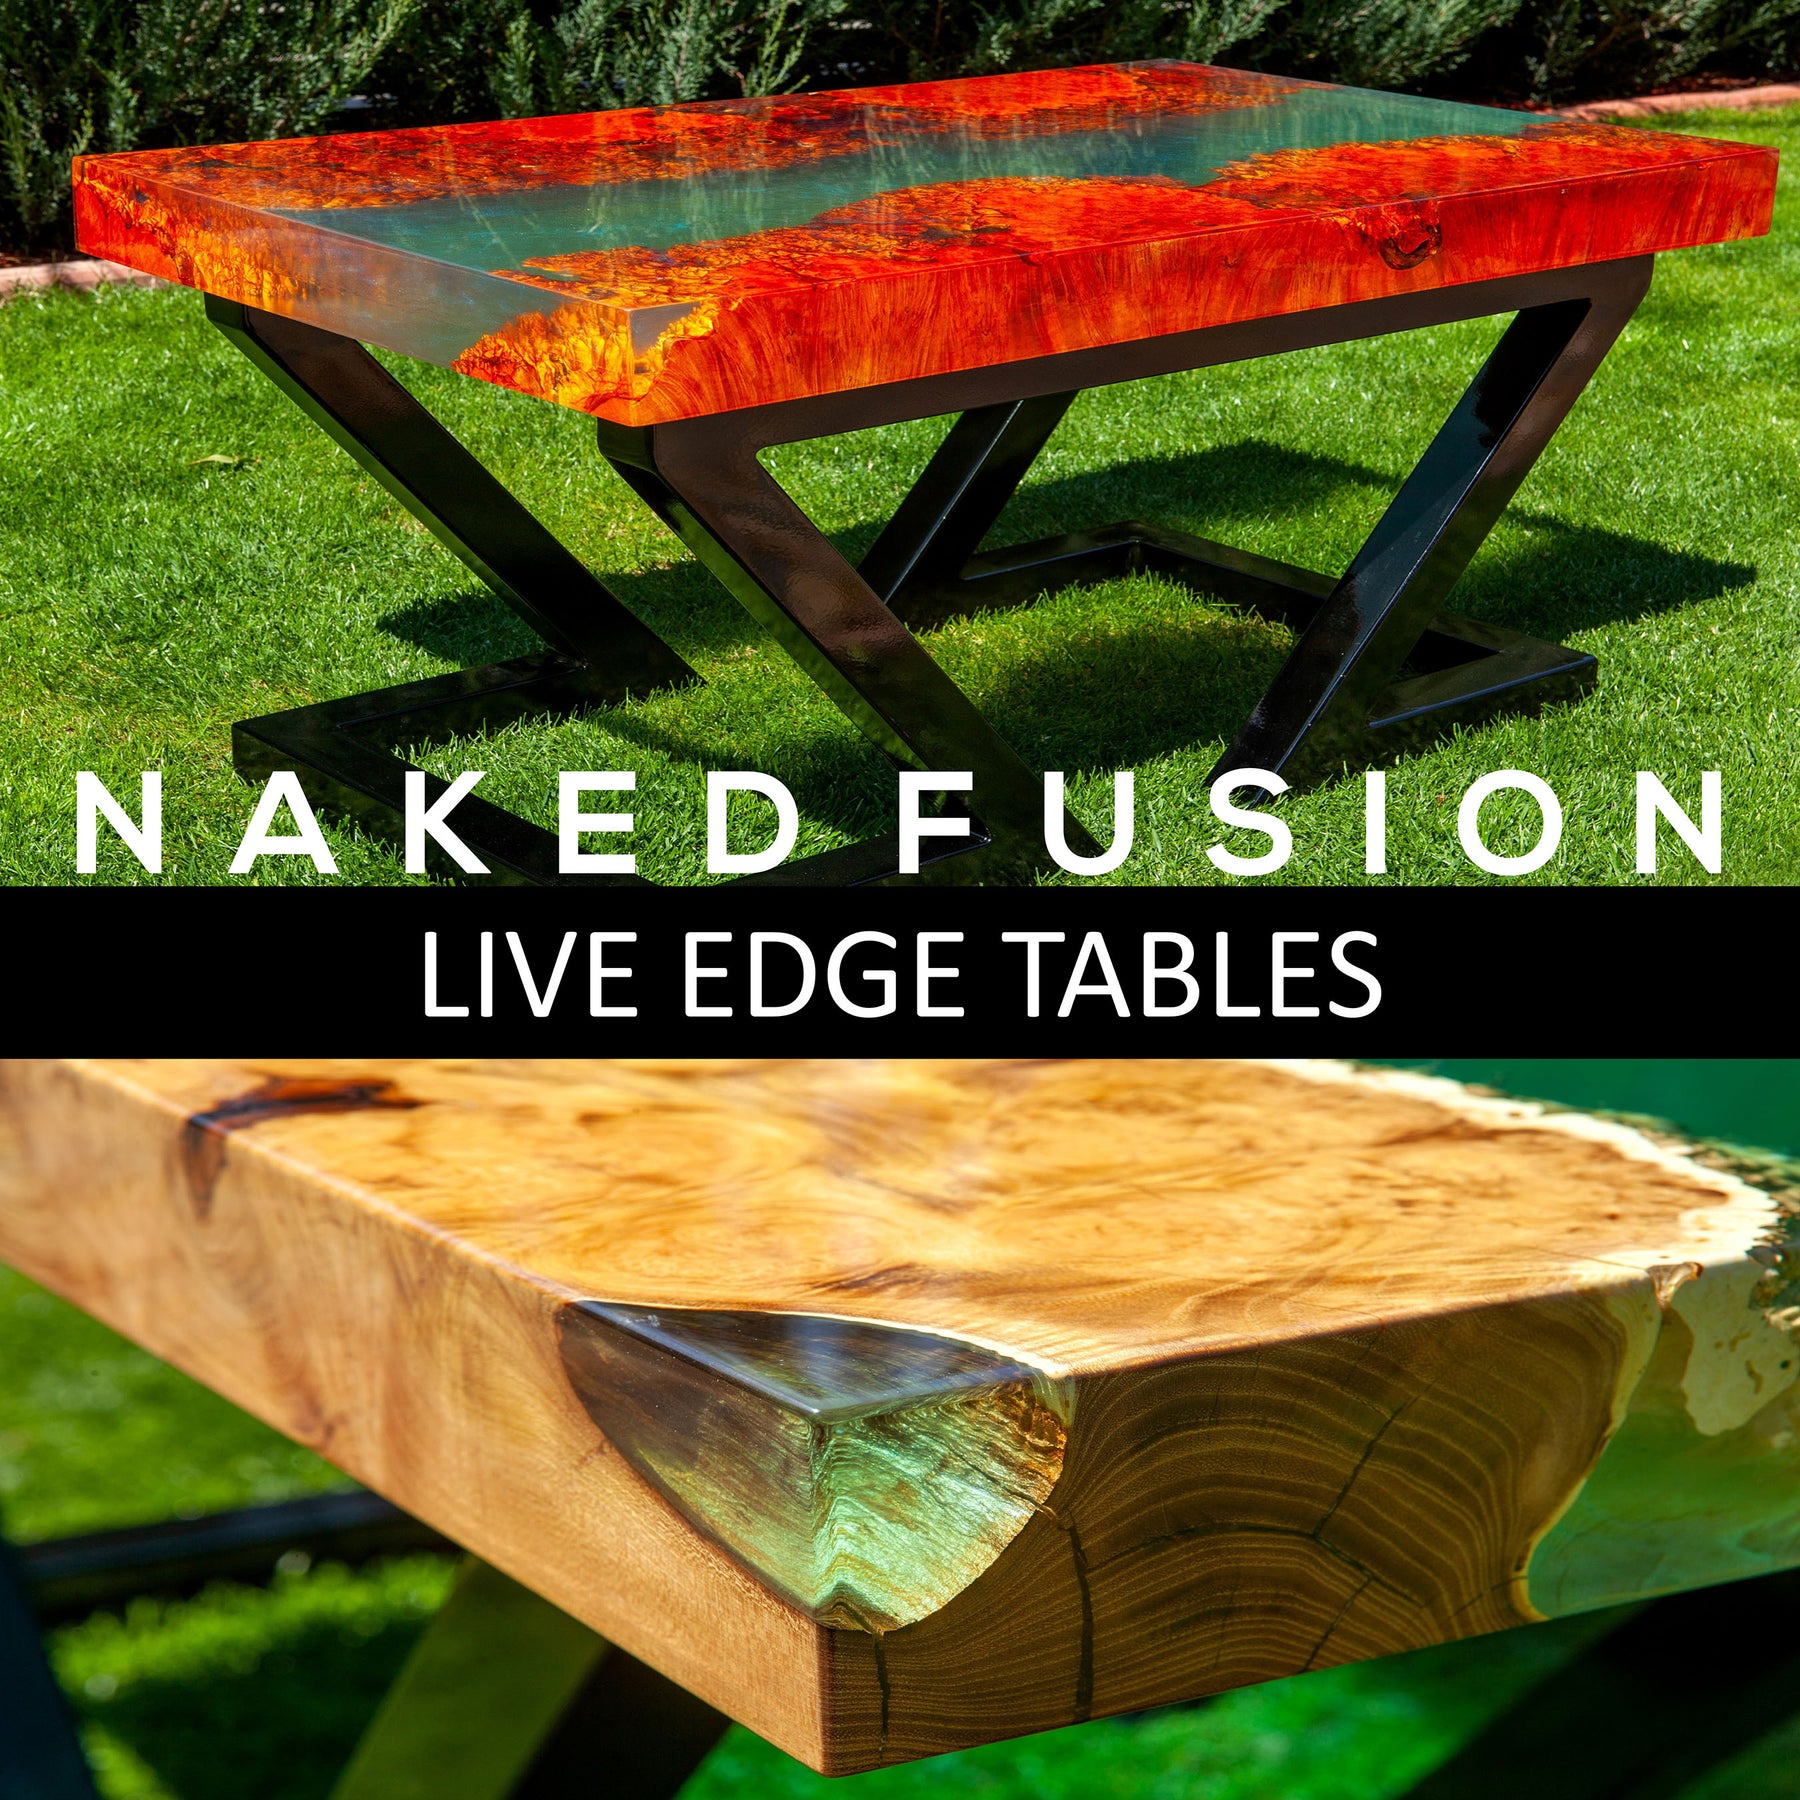 DEEP POUR RESIN INSTRUCTIONS - Naked Fusion Resin